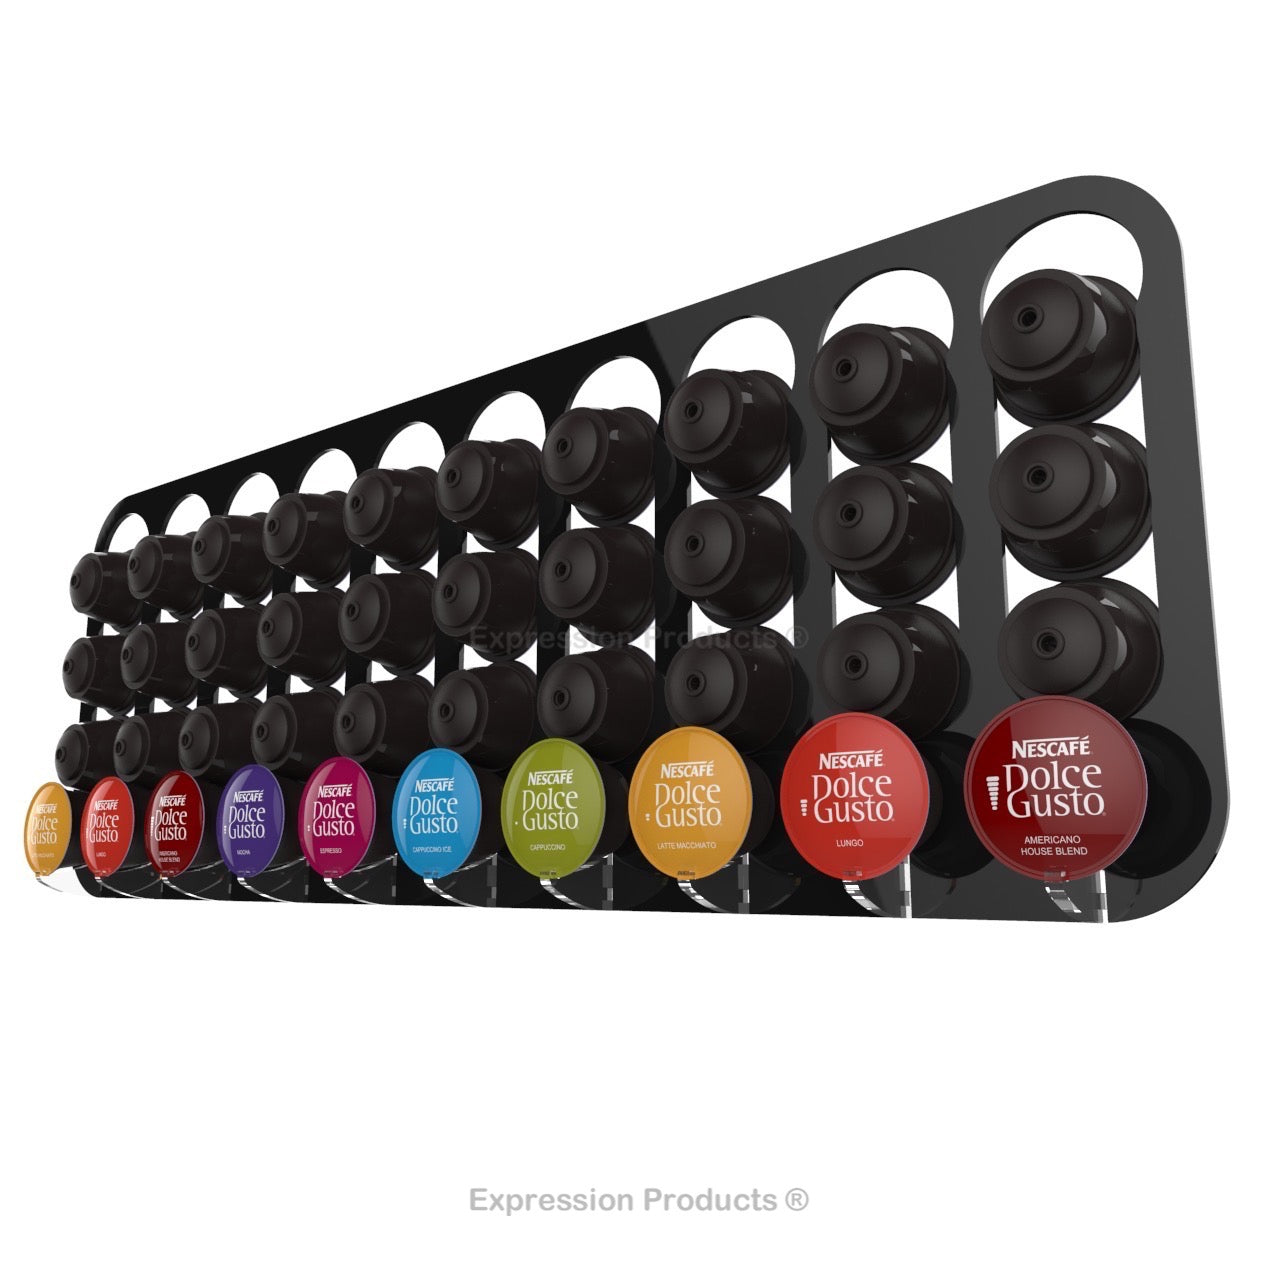 Dolce gusto coffee pod holder, wall mounted, half height.  Shown in black holding 40 pods